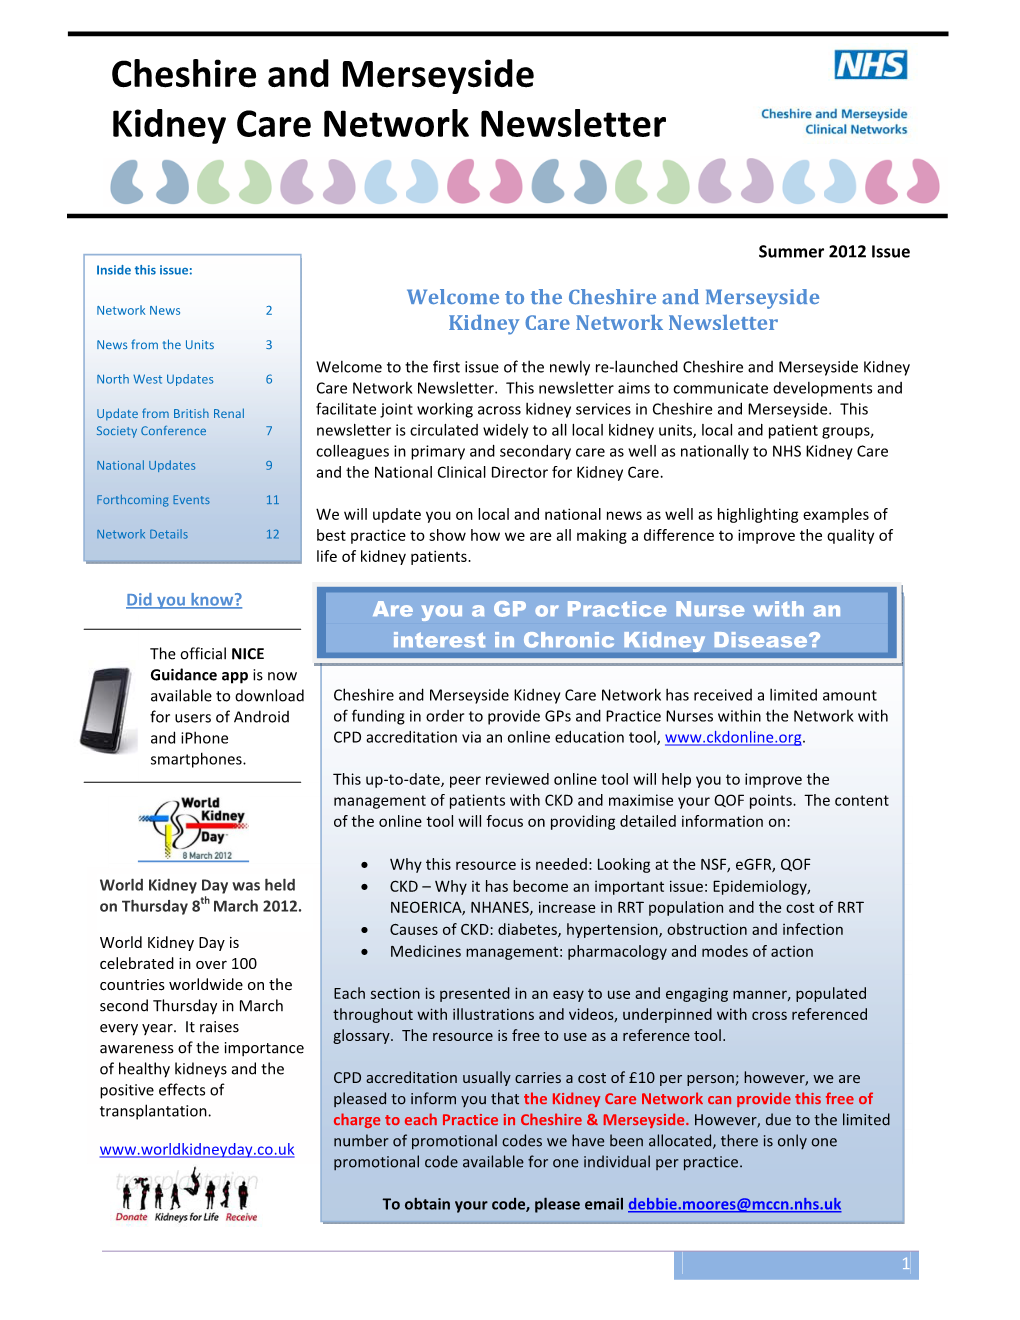 Cheshire and Merseyside Kidney Care Network Newsletter